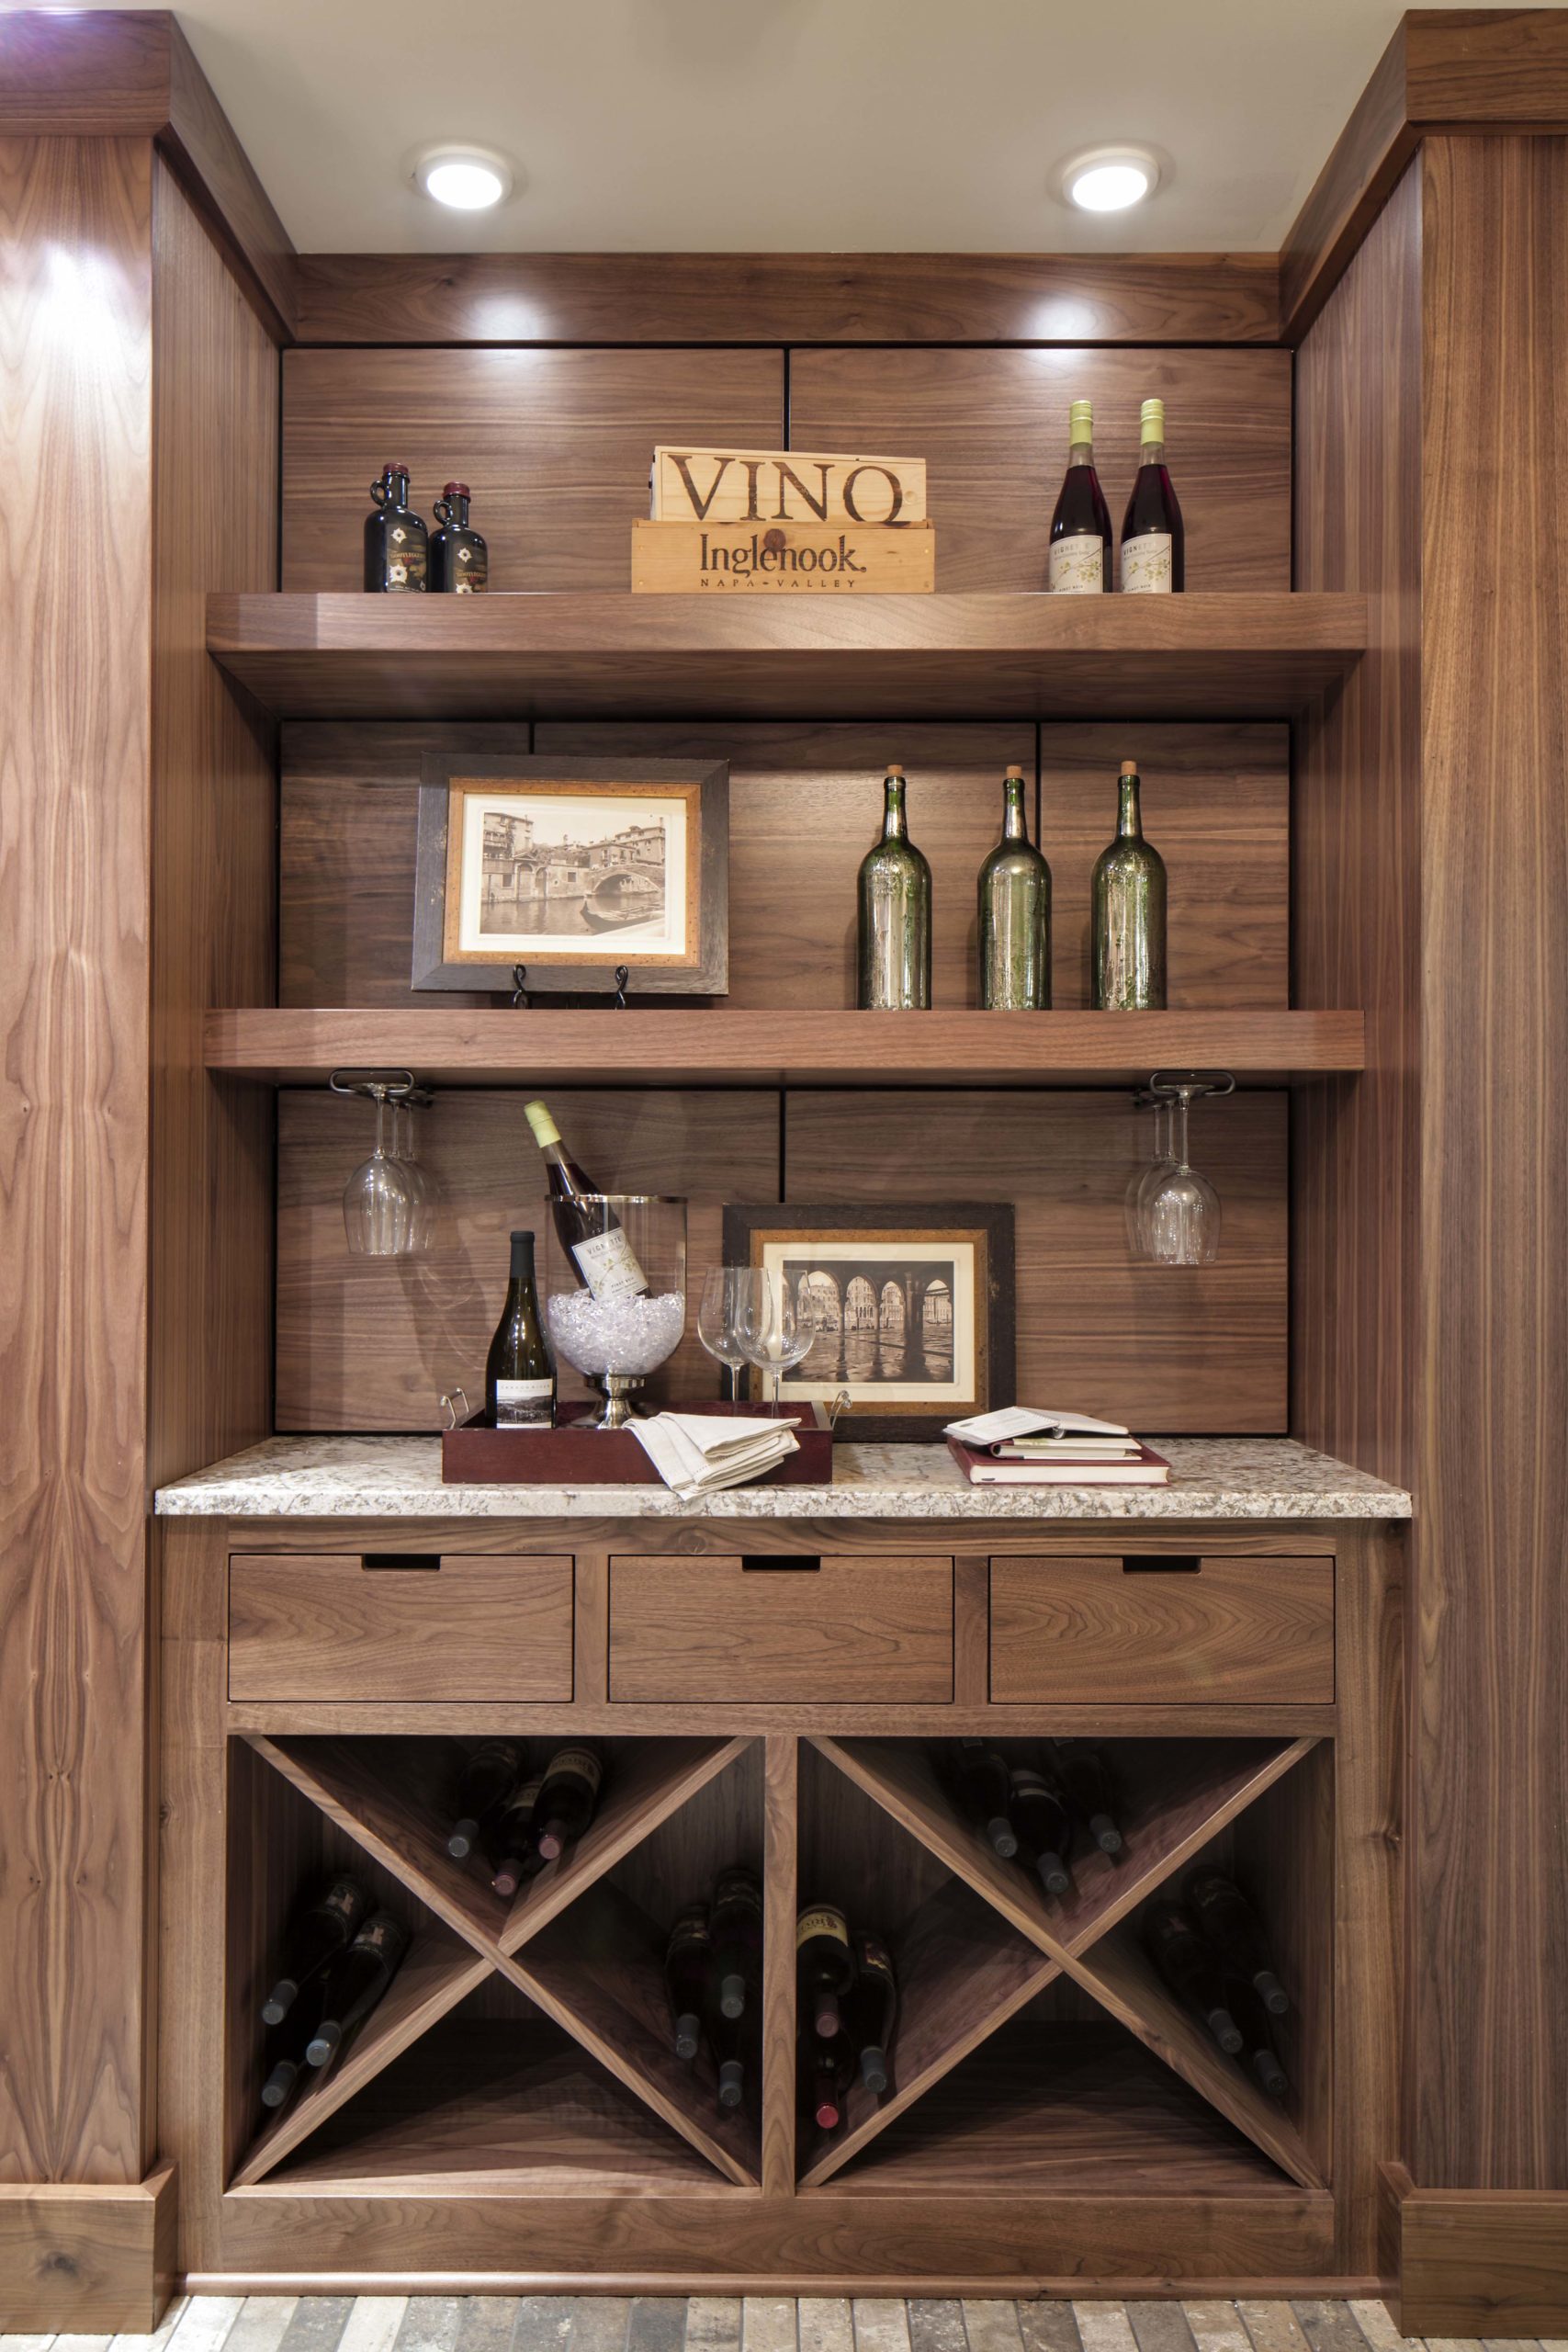 A wine cellar with shelves and wine bottles.